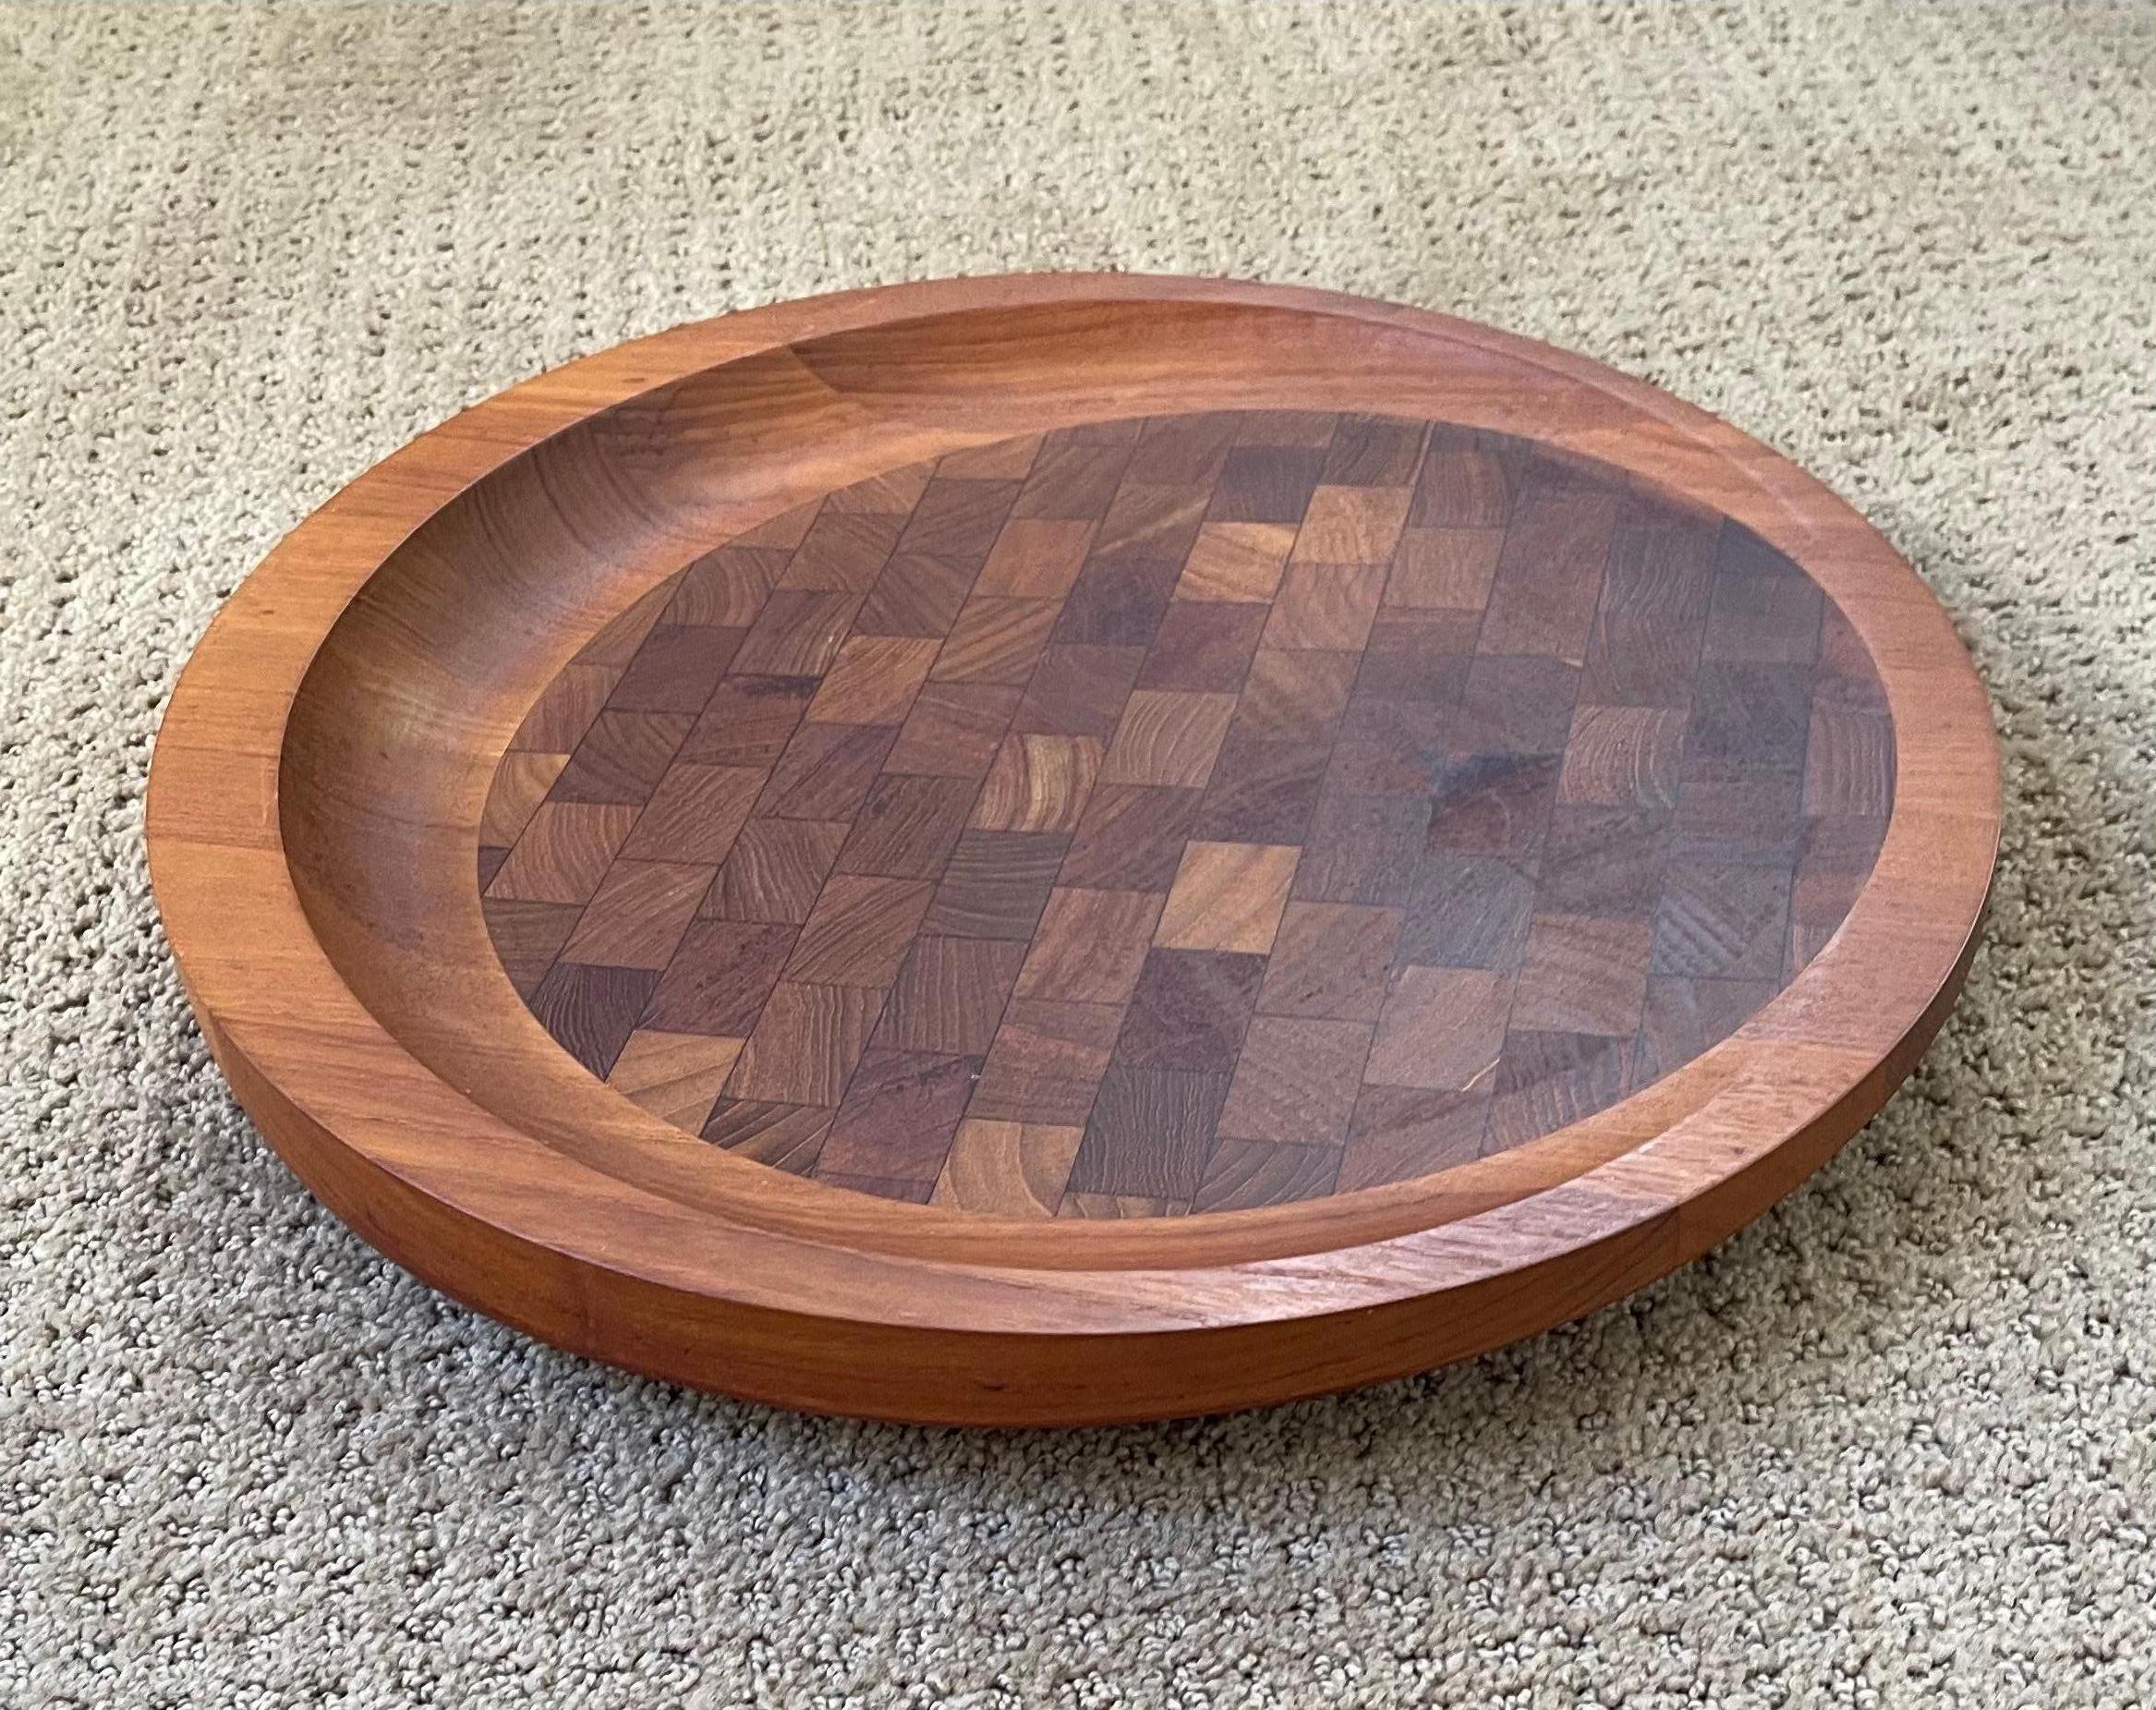 Danish modern teak butcher block round cutting board by Jens Quistgaard for Dansk, circa 1960s. The board is in very good vintage condition and measures 17.25